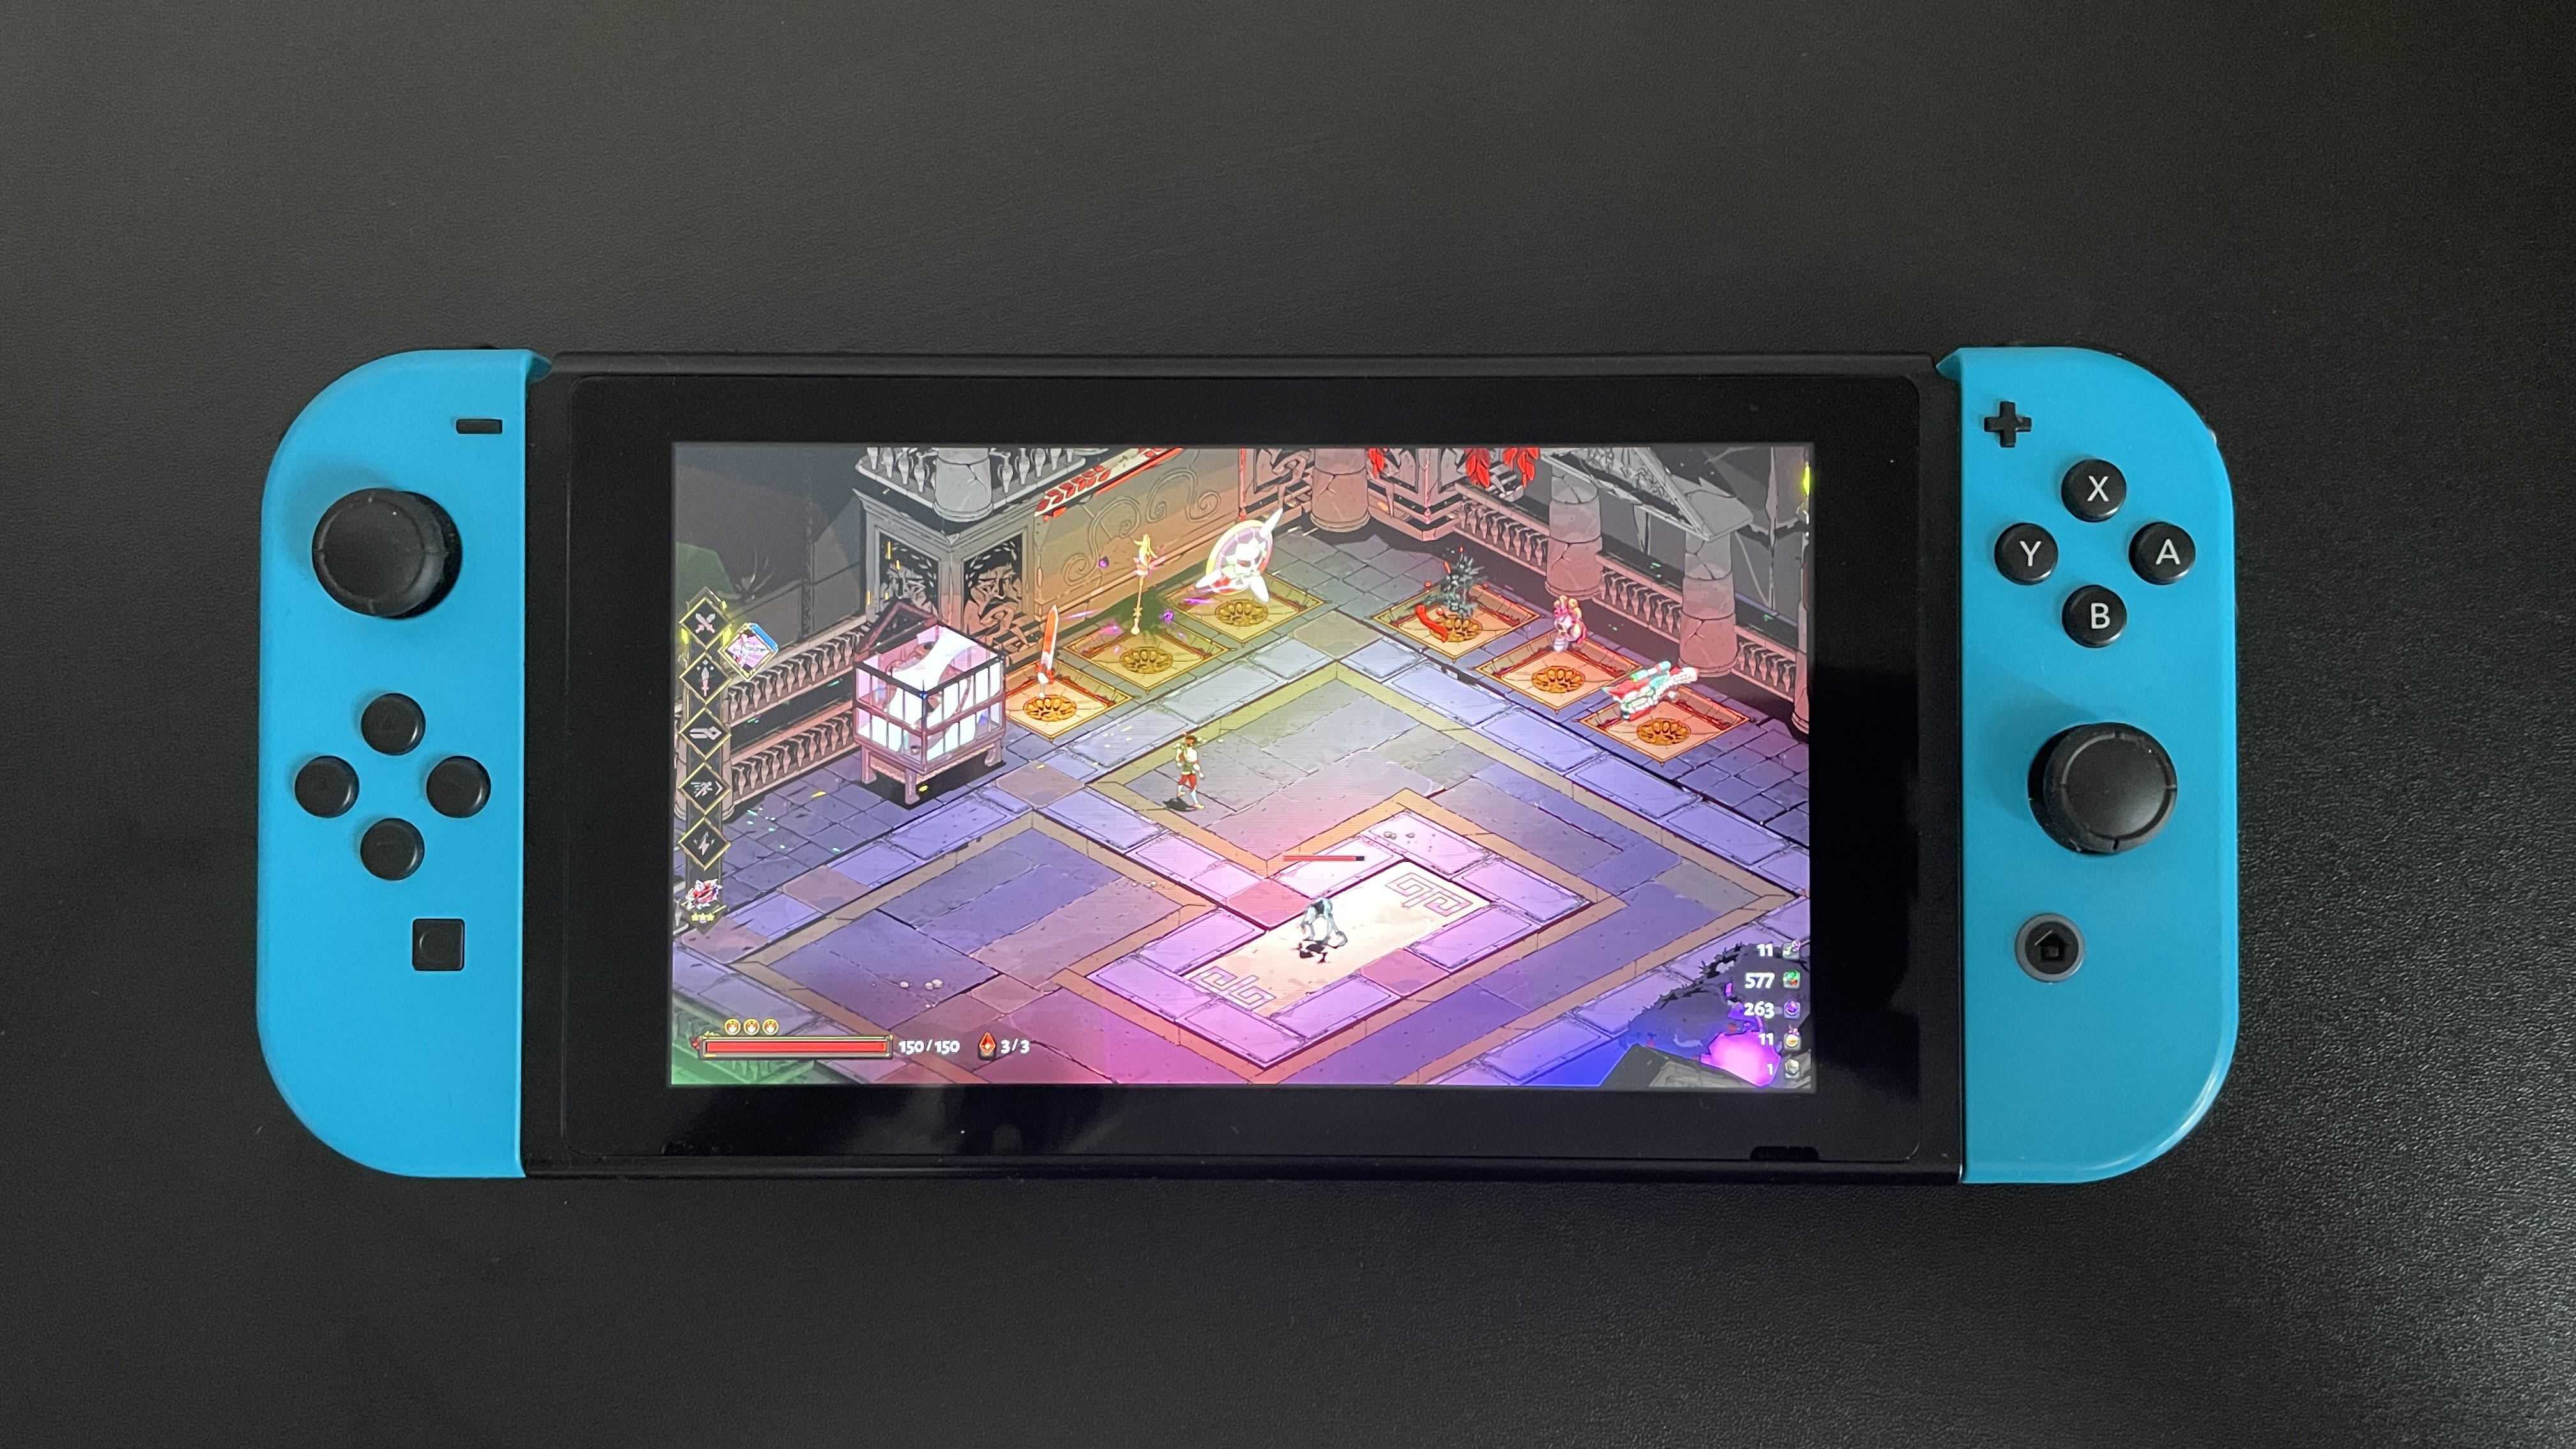 Nintendo Switch Review: The Best Portable Gaming Console